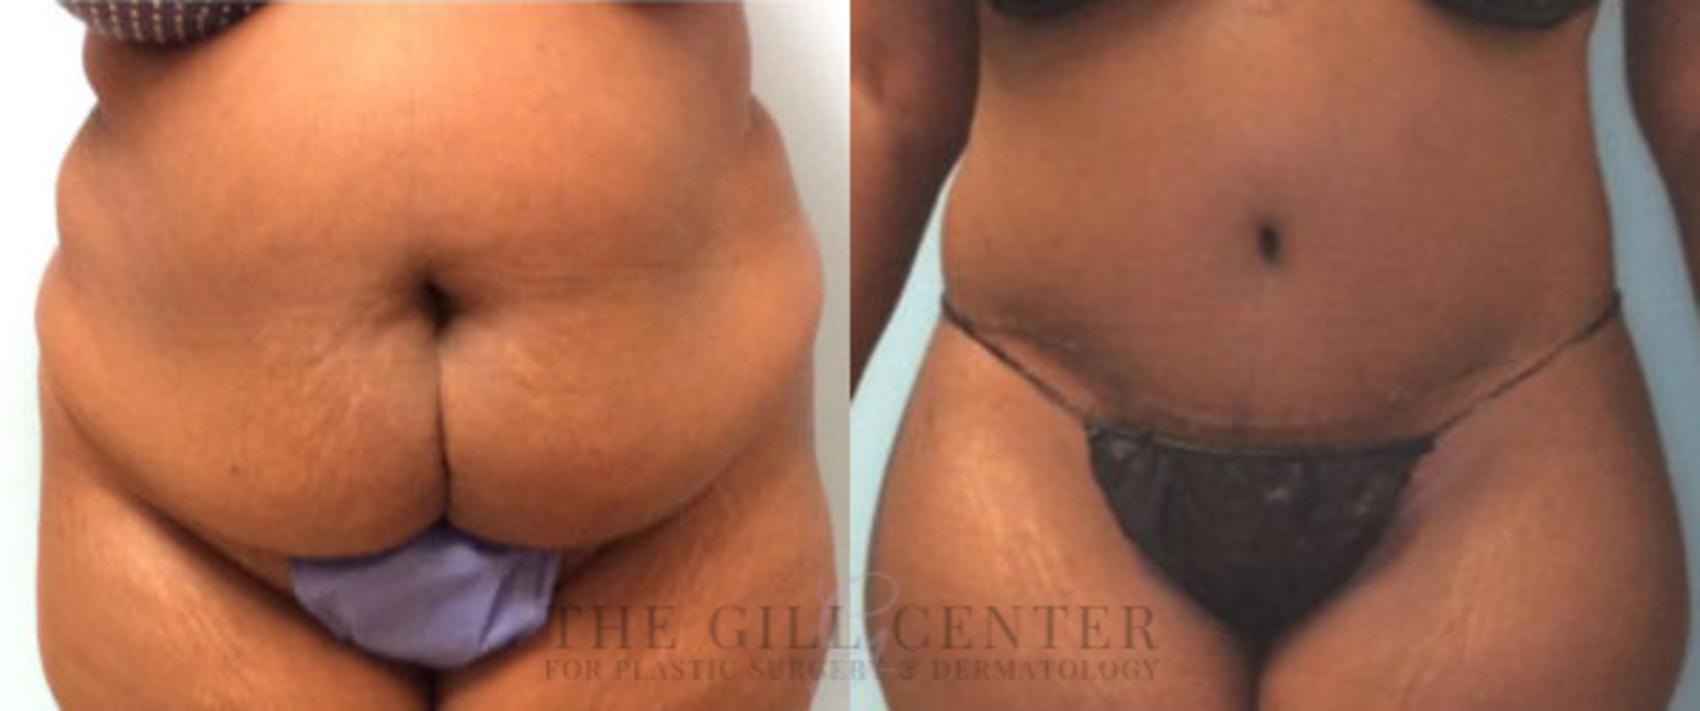 Tummy Tuck Case 181 Before & After Front | The Woodlands, TX | The Gill Center for Plastic Surgery and Dermatology